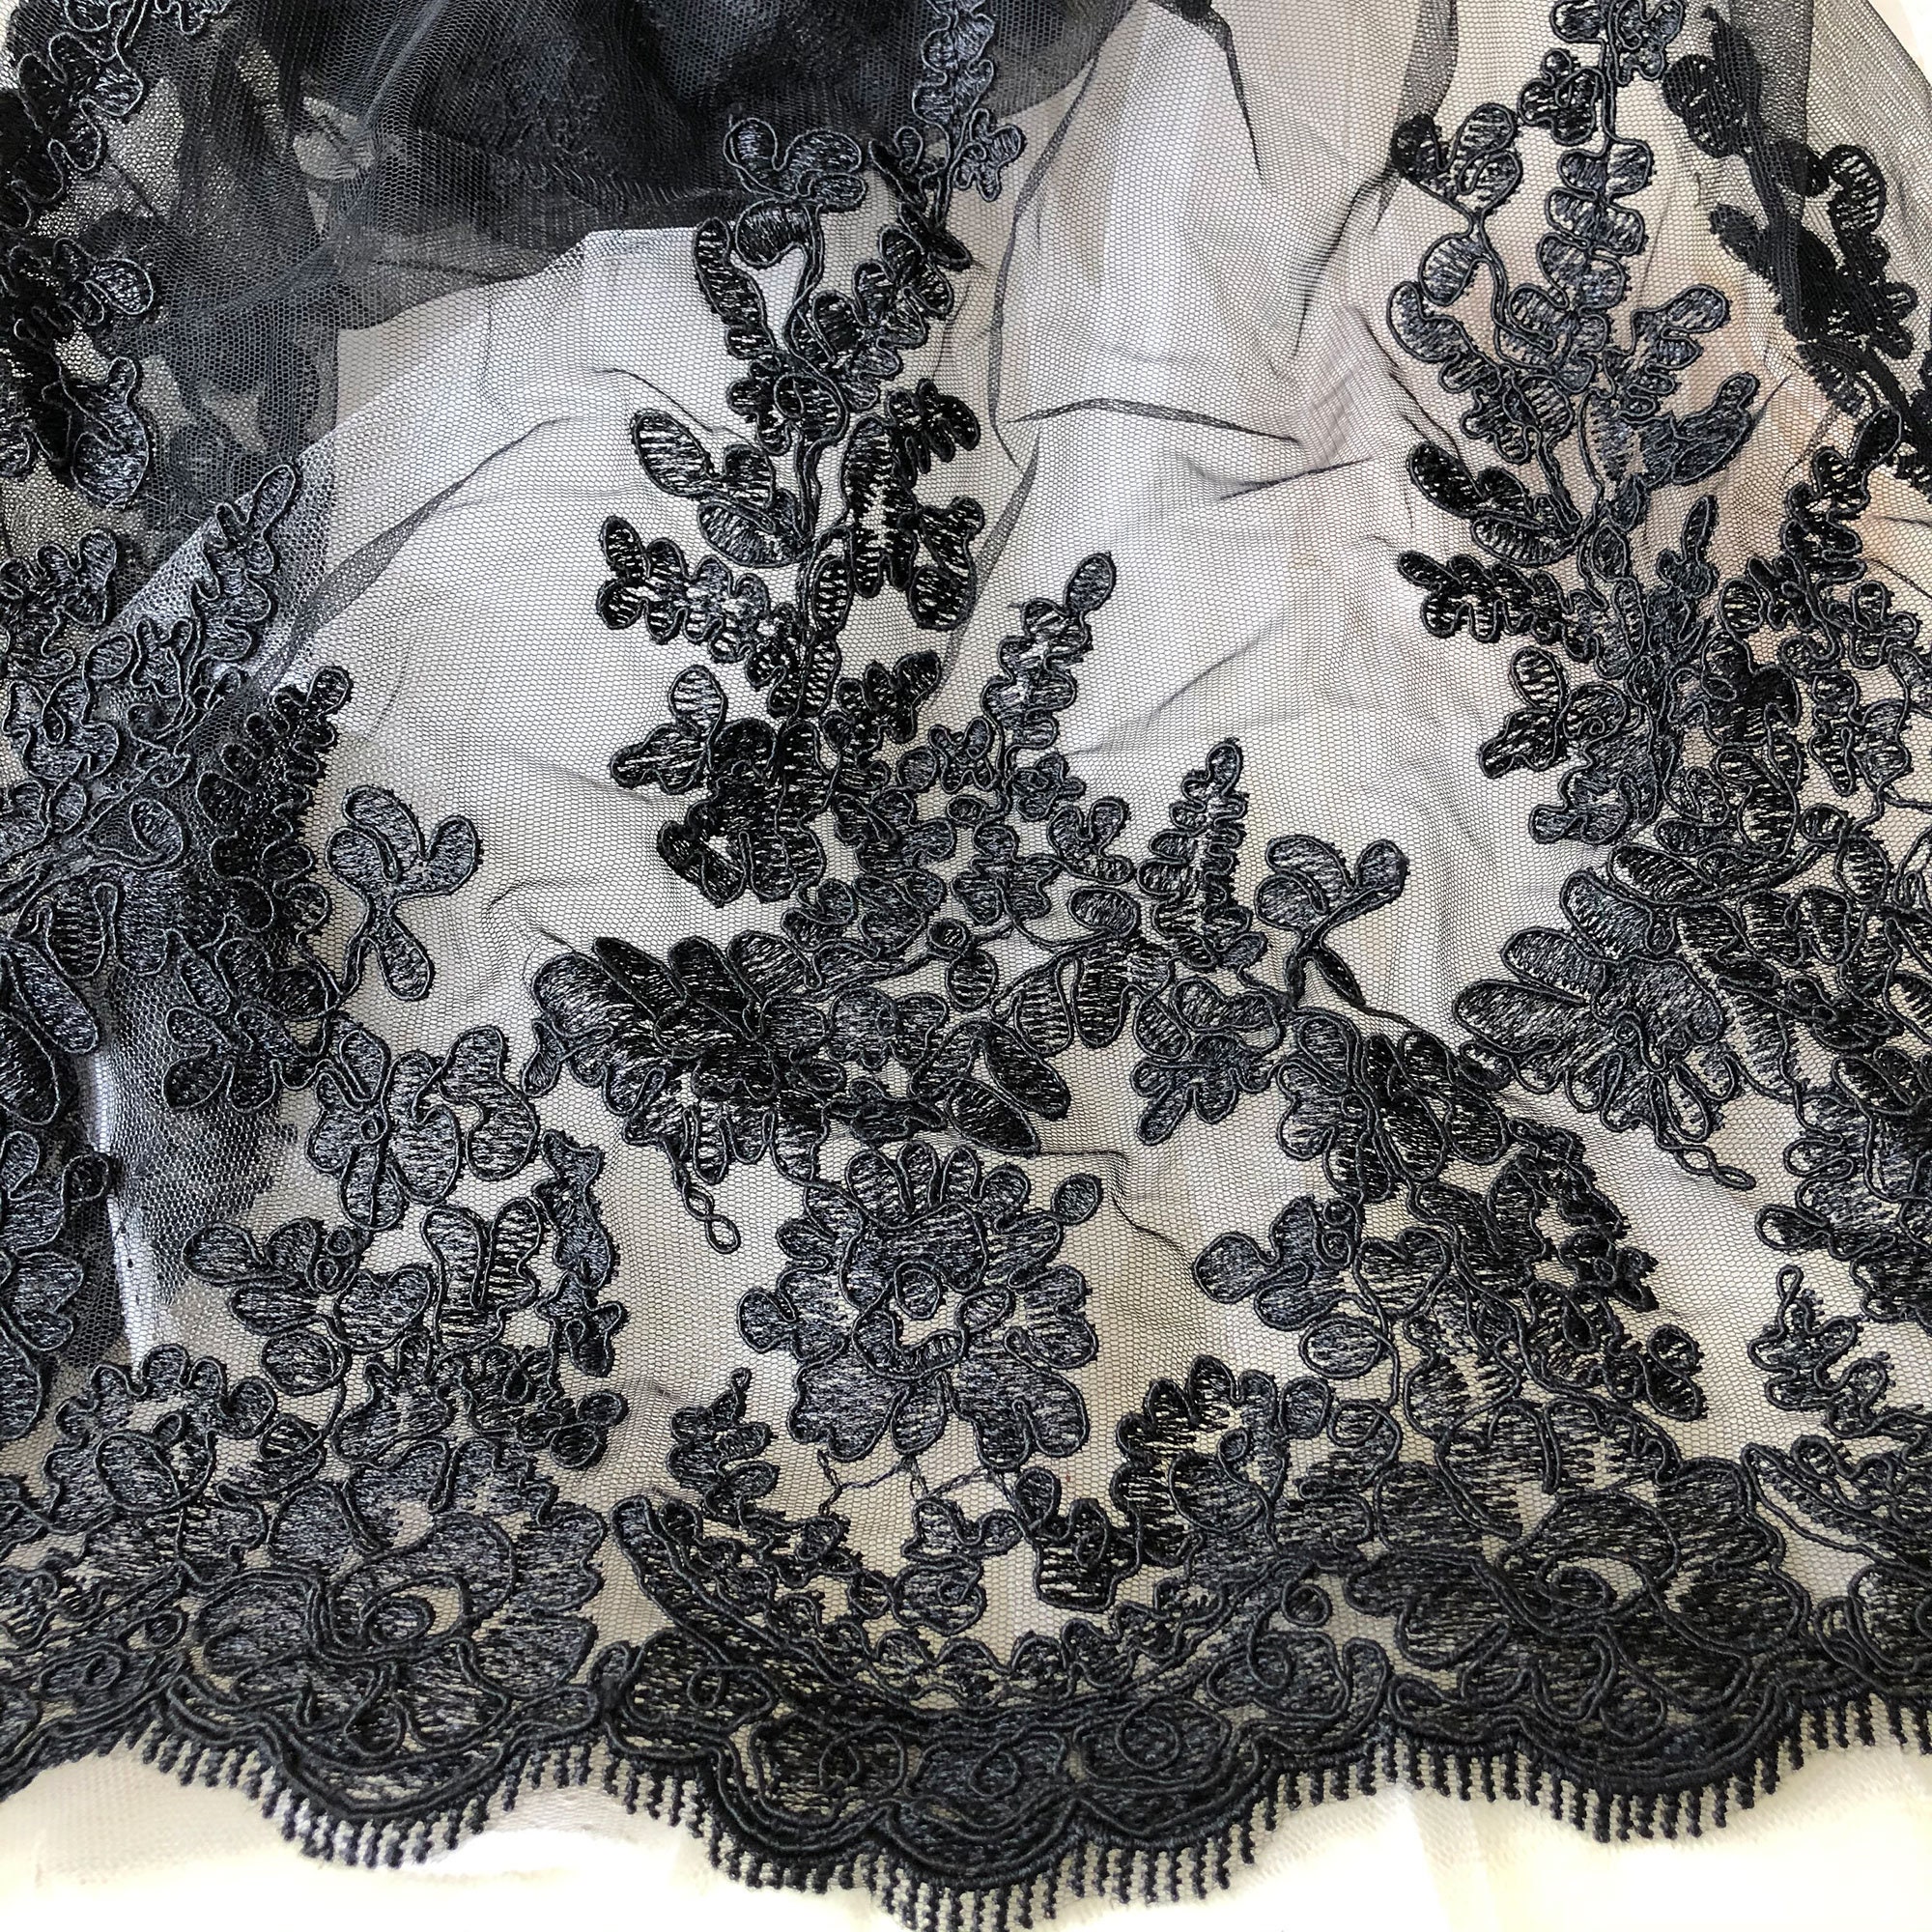 Black Lace Fabric by the Yard Corded Embroidery Floral Lace | Etsy